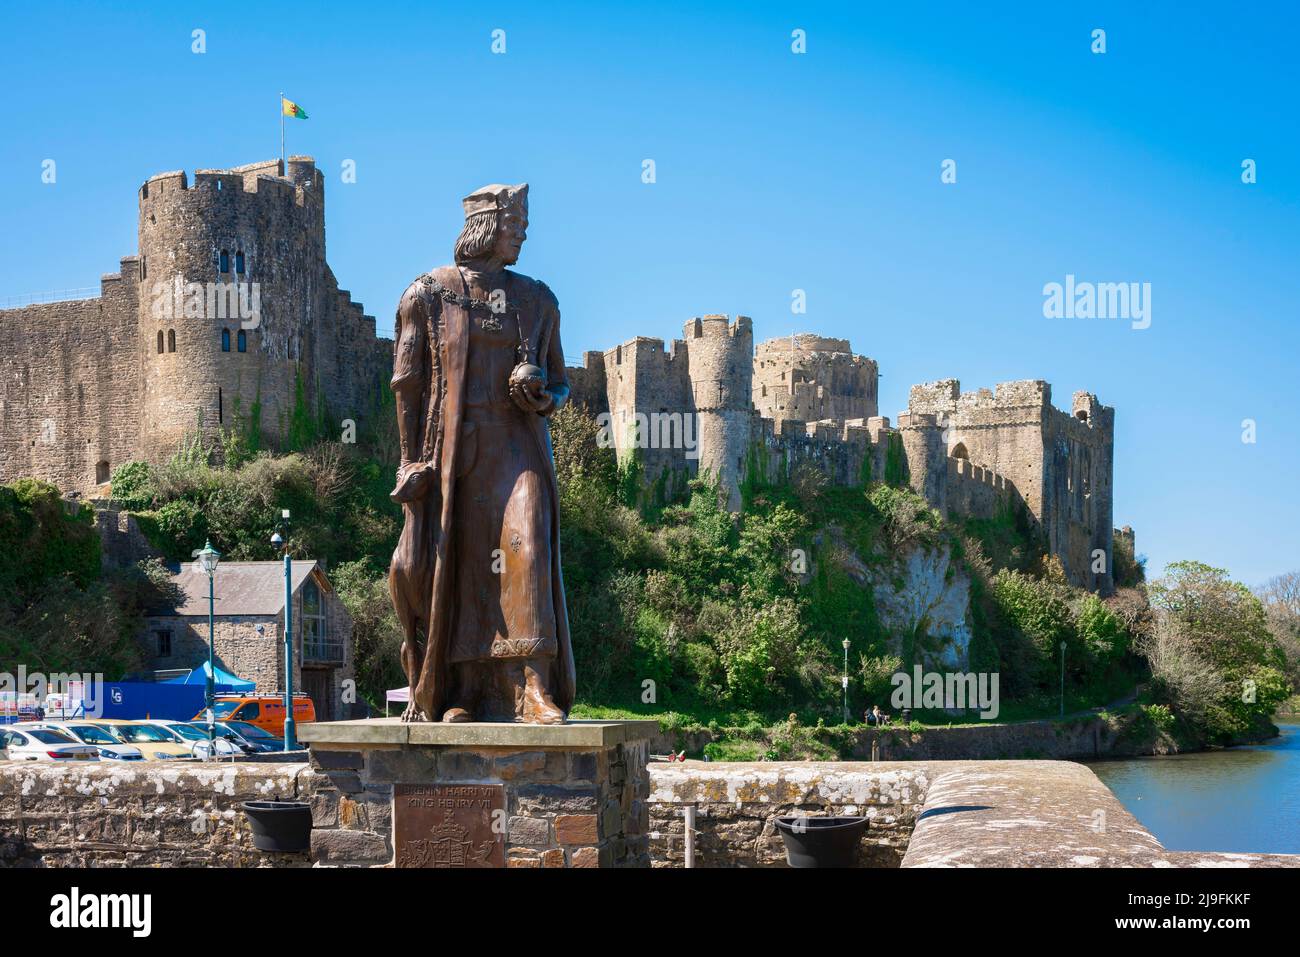 Pembroke Wales, view of Pembroke Castle with the  statue of King Henry VII sited on Mill Bridge in Northgate Street, Pembroke, Pembrokeshire, Wales UK Stock Photo